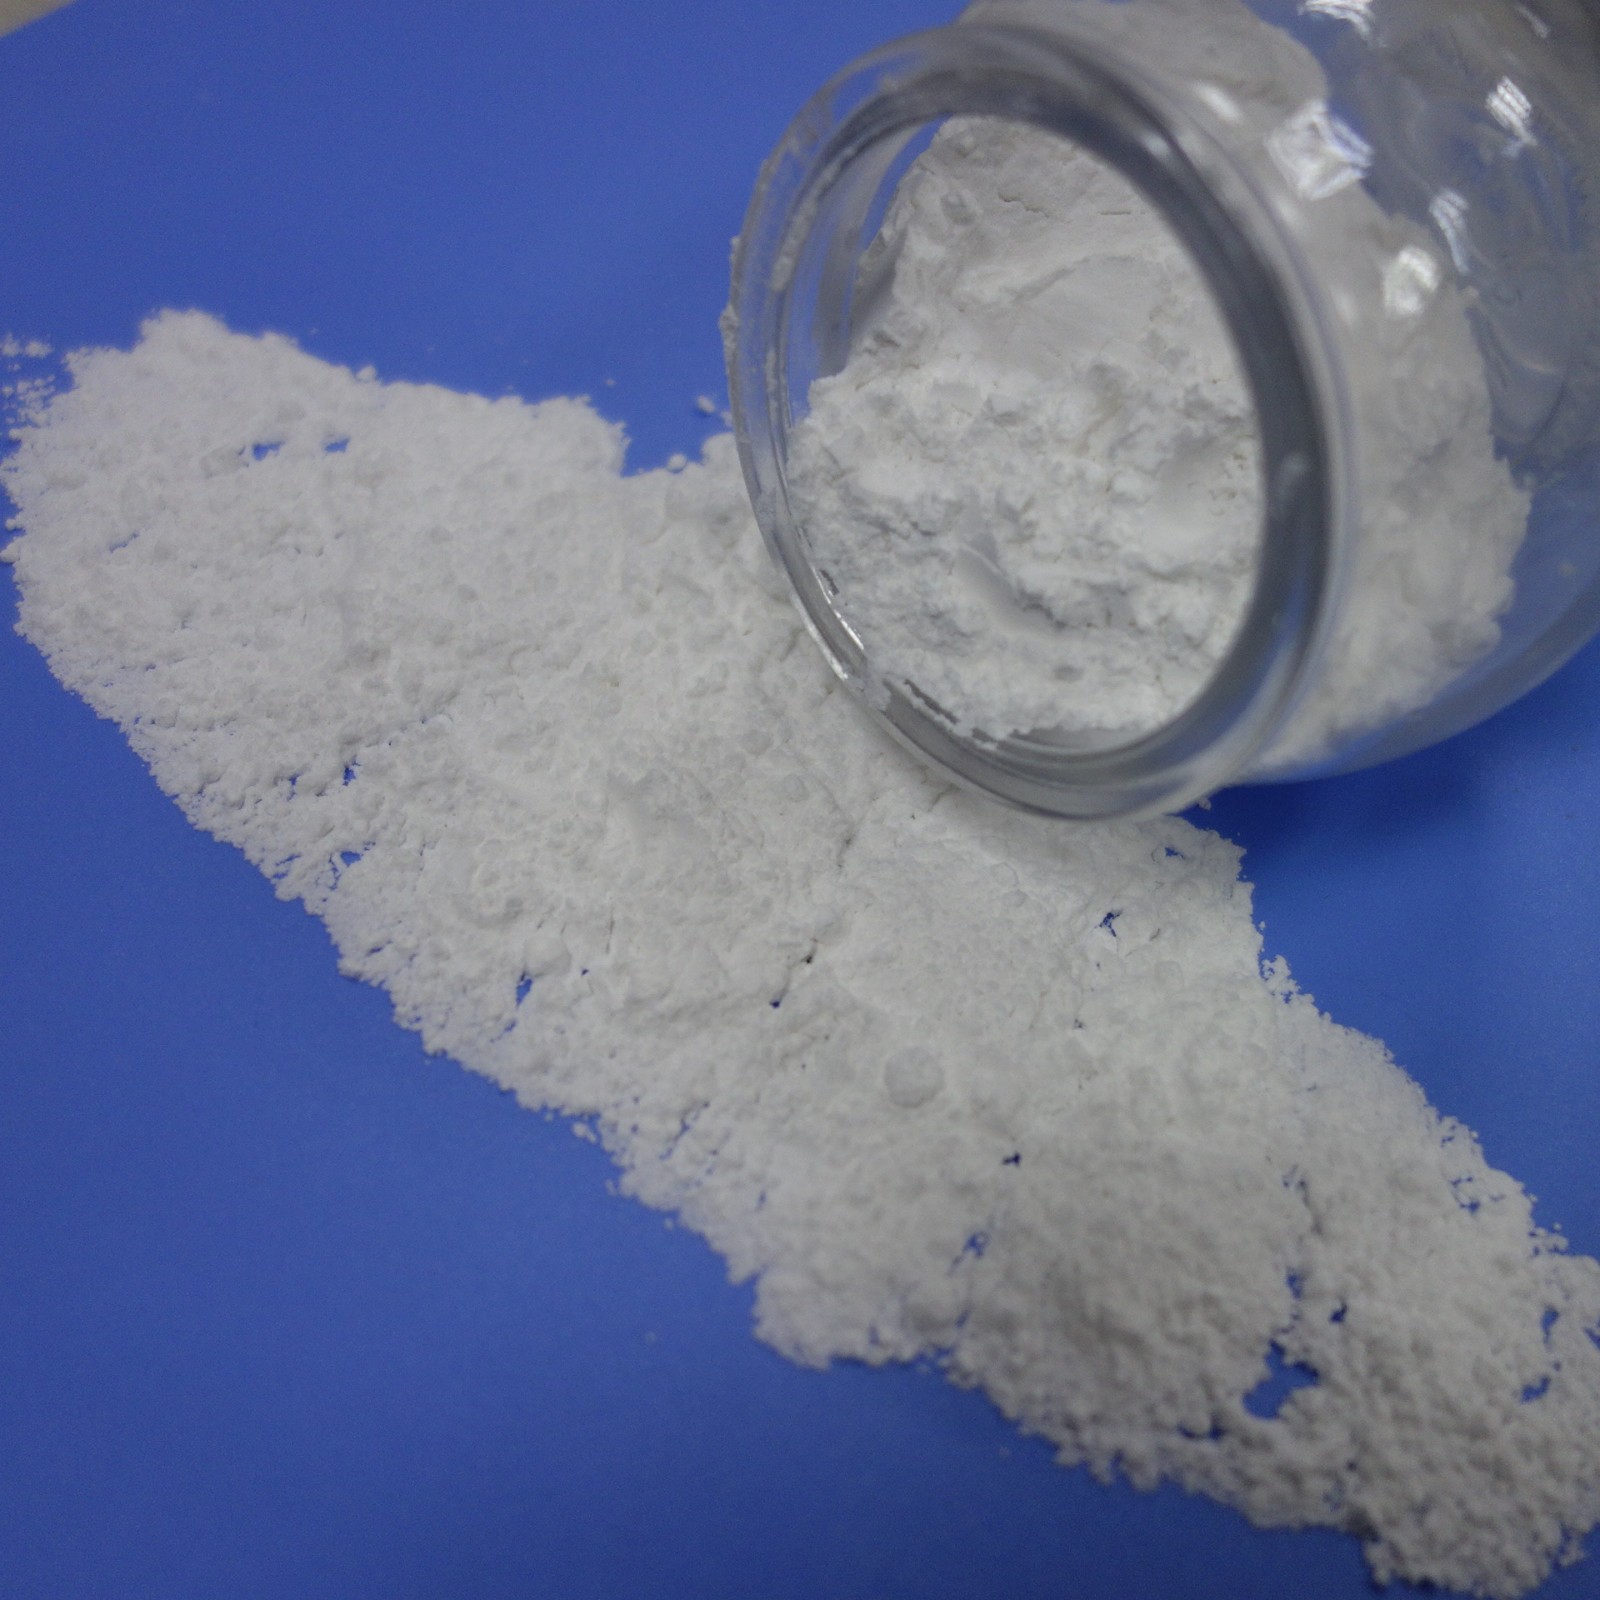 Yixin barium carbonate solubility in water manufacturers used in bricks